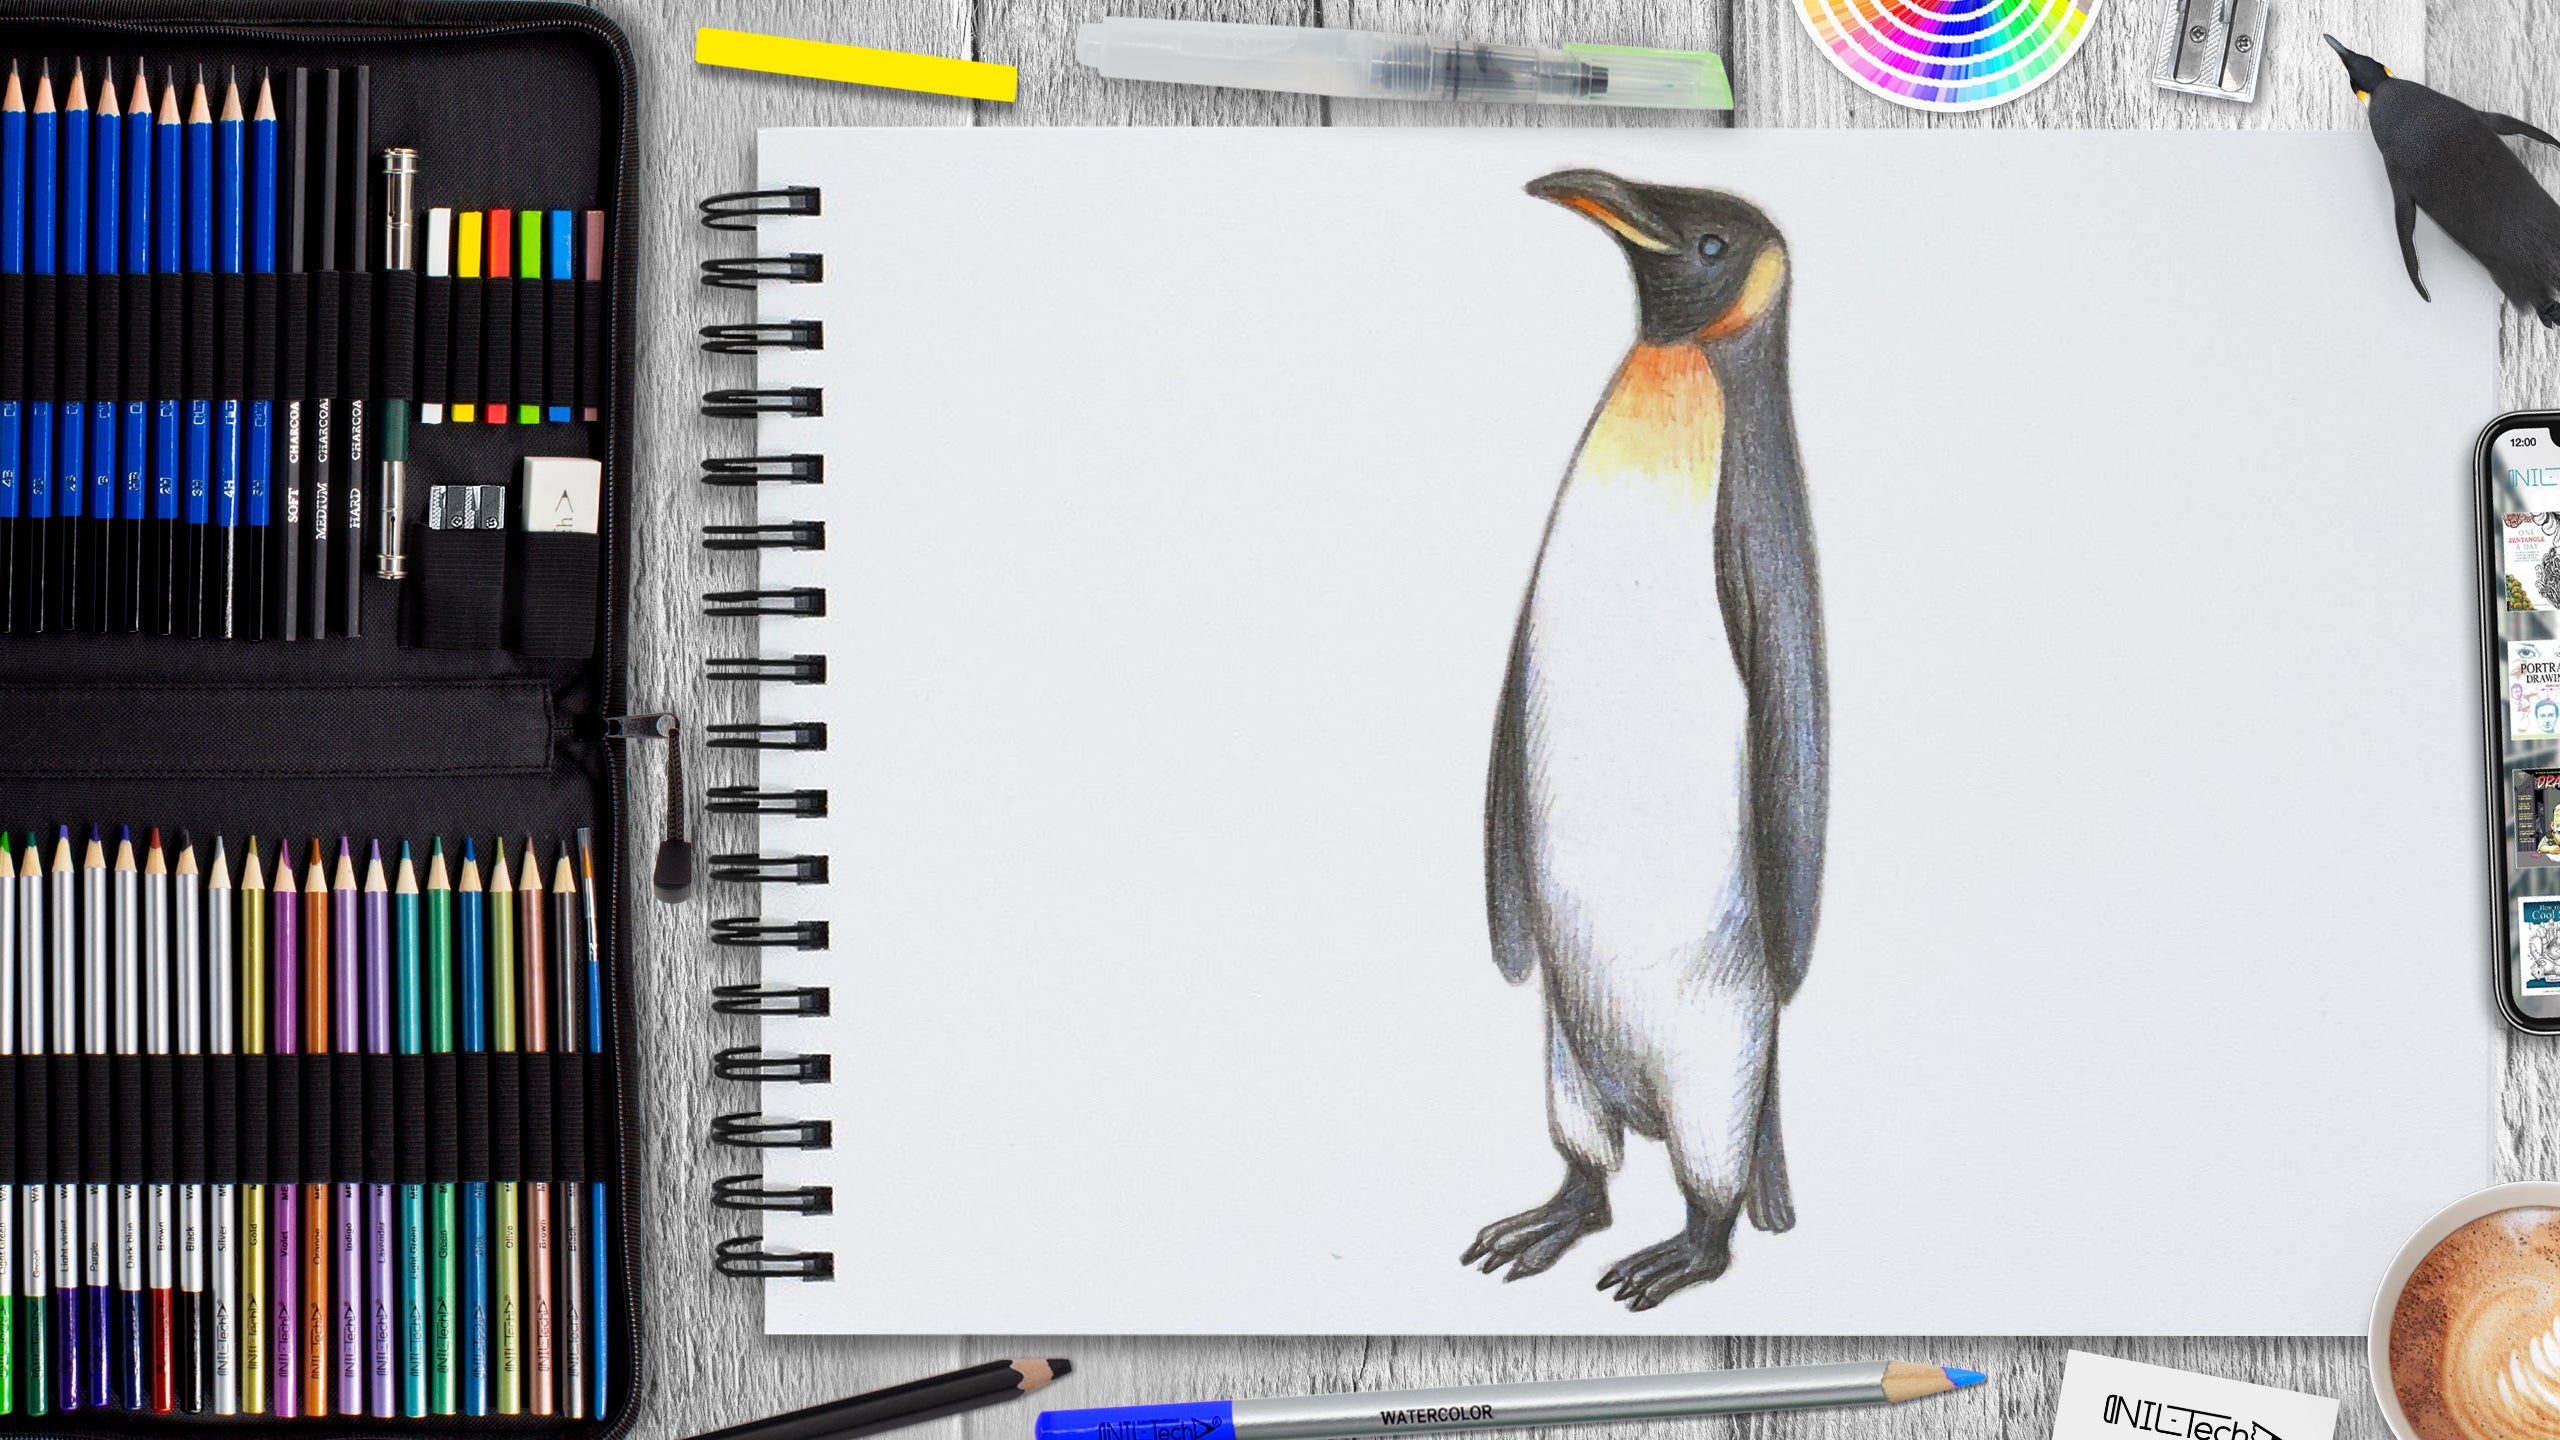 how to draw a penguin step by step